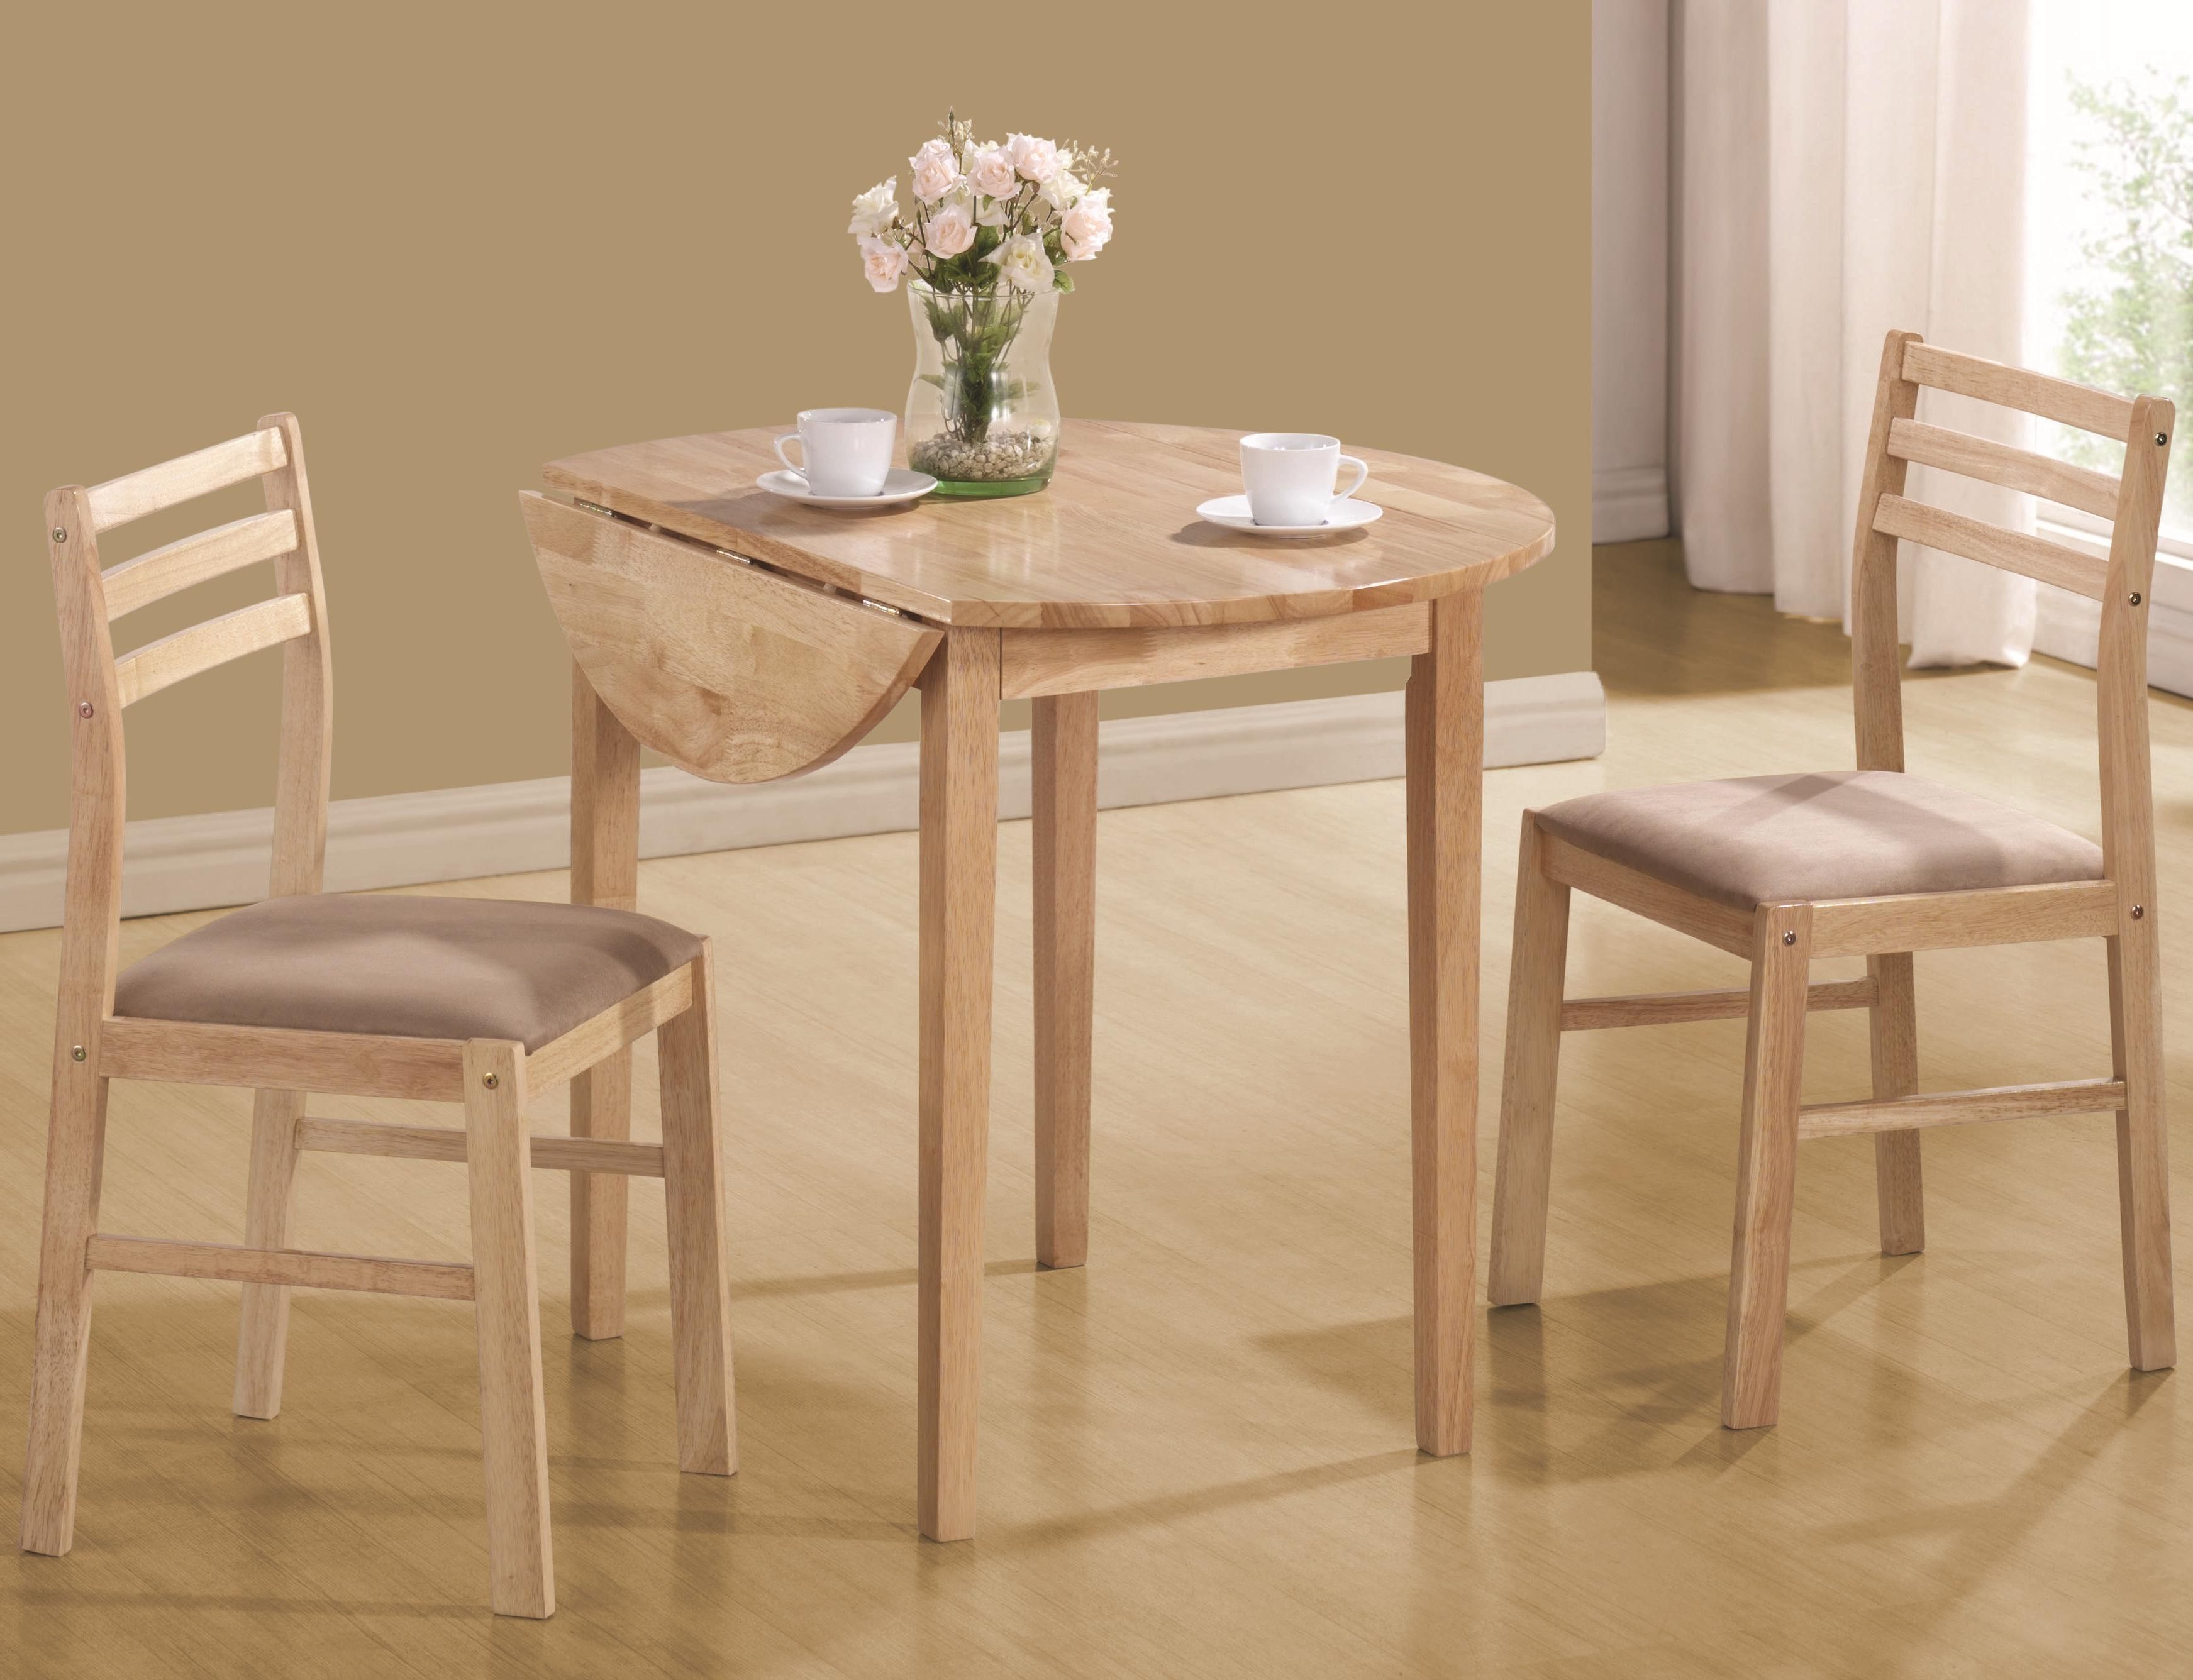 Best And Newest Dinettes Casual 3 Piece Table & Chair Setcoaster At Value City Furniture Within 3 Piece Breakfast Dining Sets (View 7 of 20)